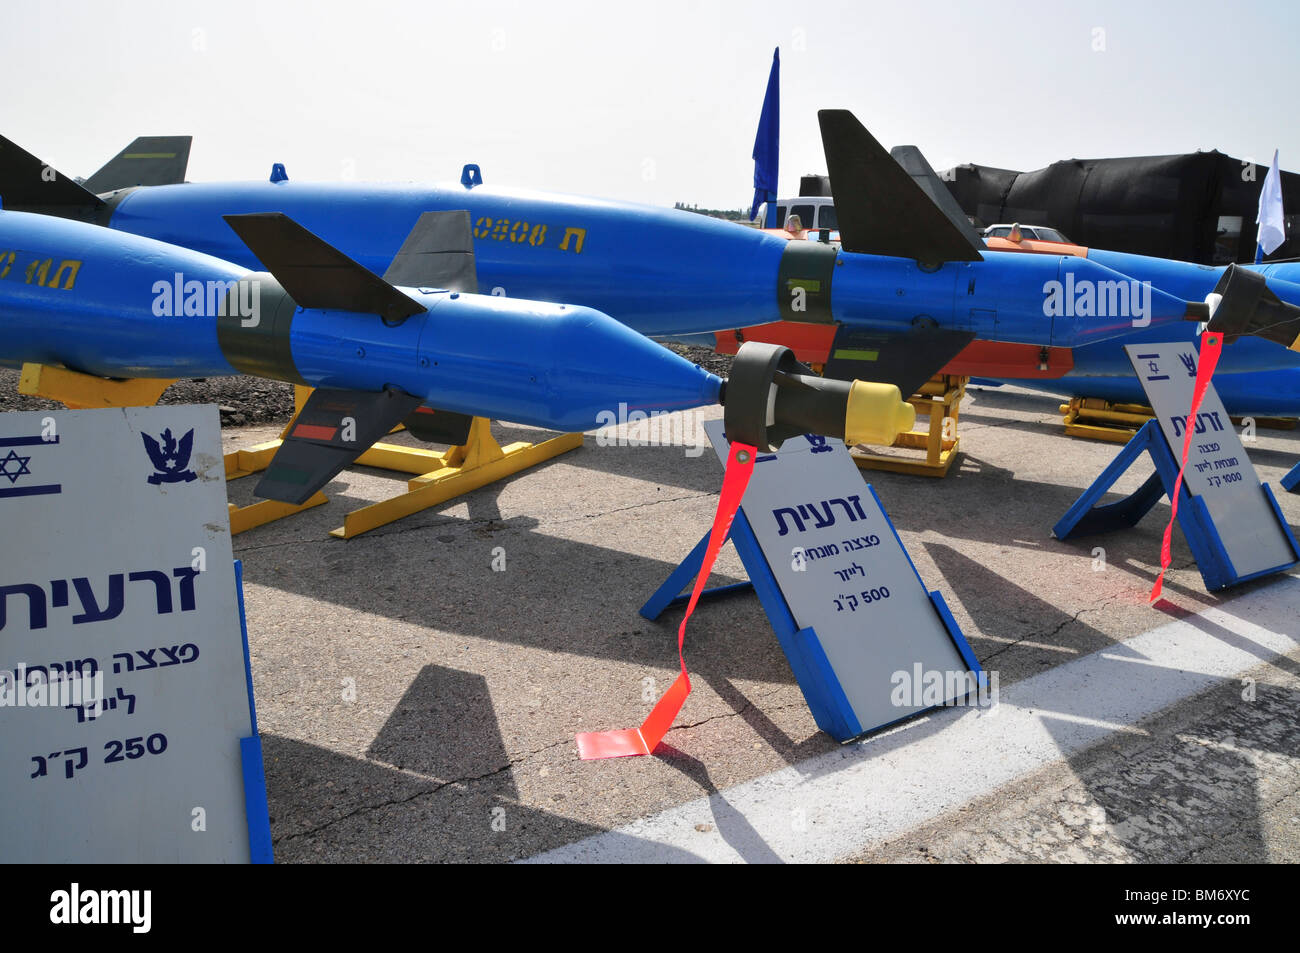 Israel, Tel Nof IAF Base An Israeli Air force (IAF) exhibition Air to air  laser guided missile Stock Photo - Alamy